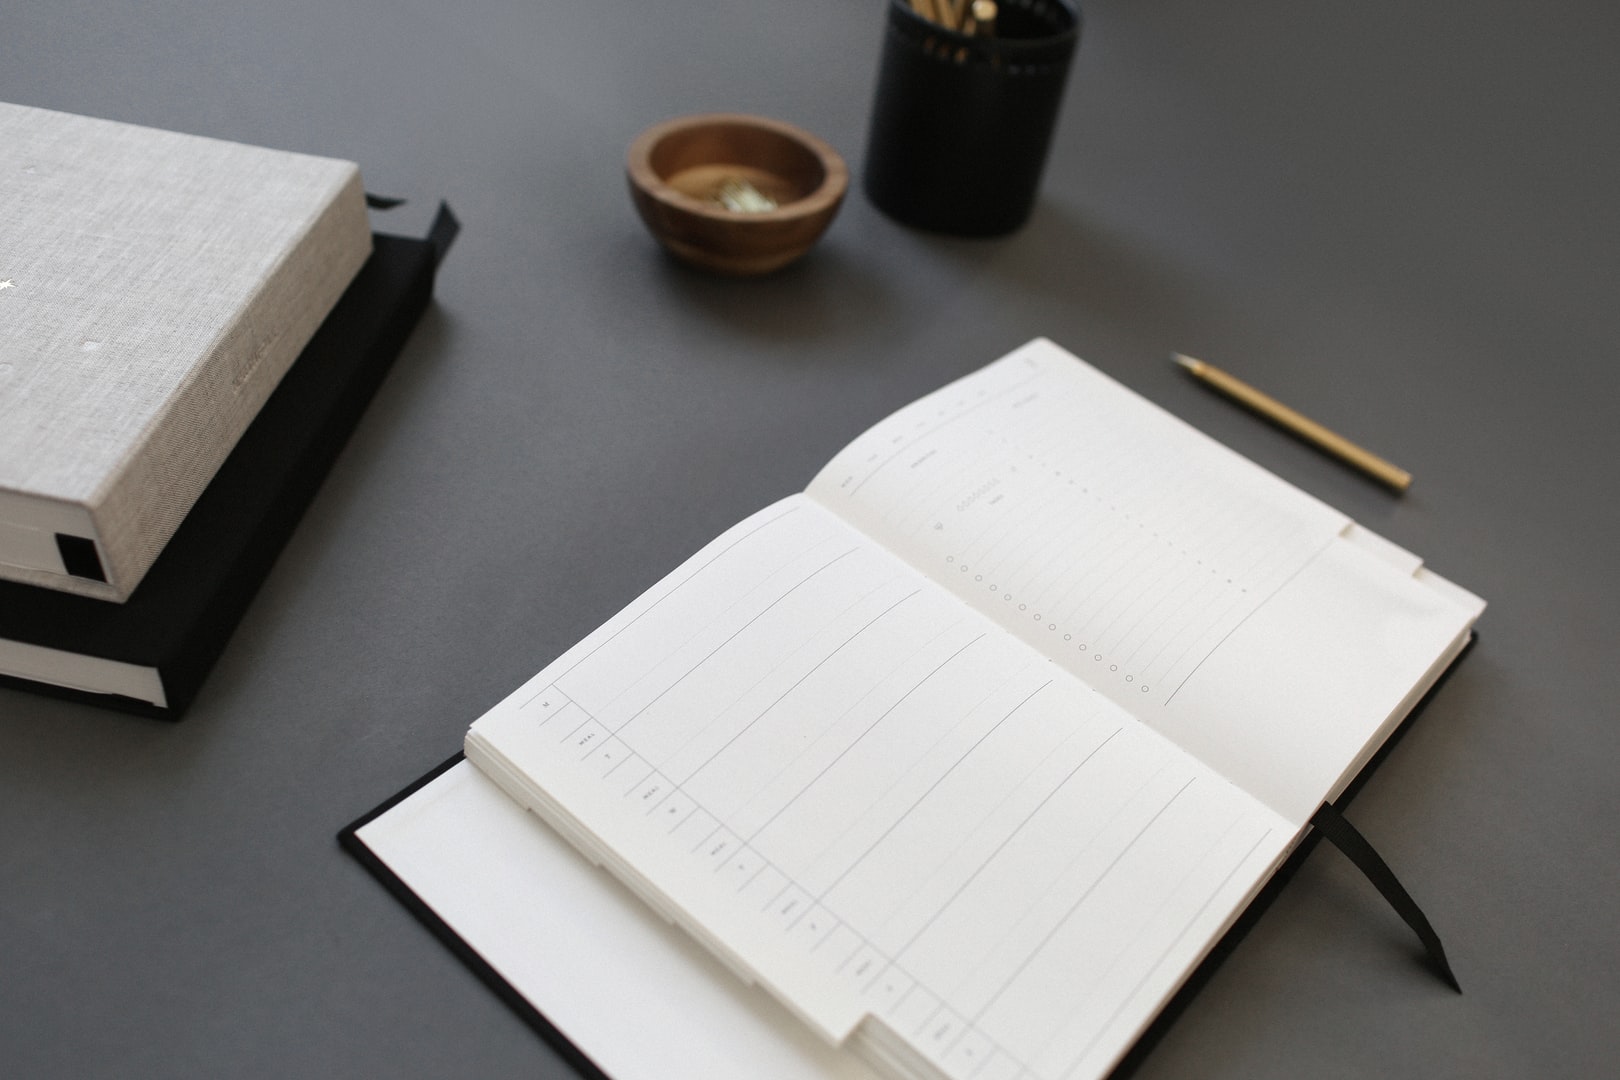 Picture of a diary open on a desk